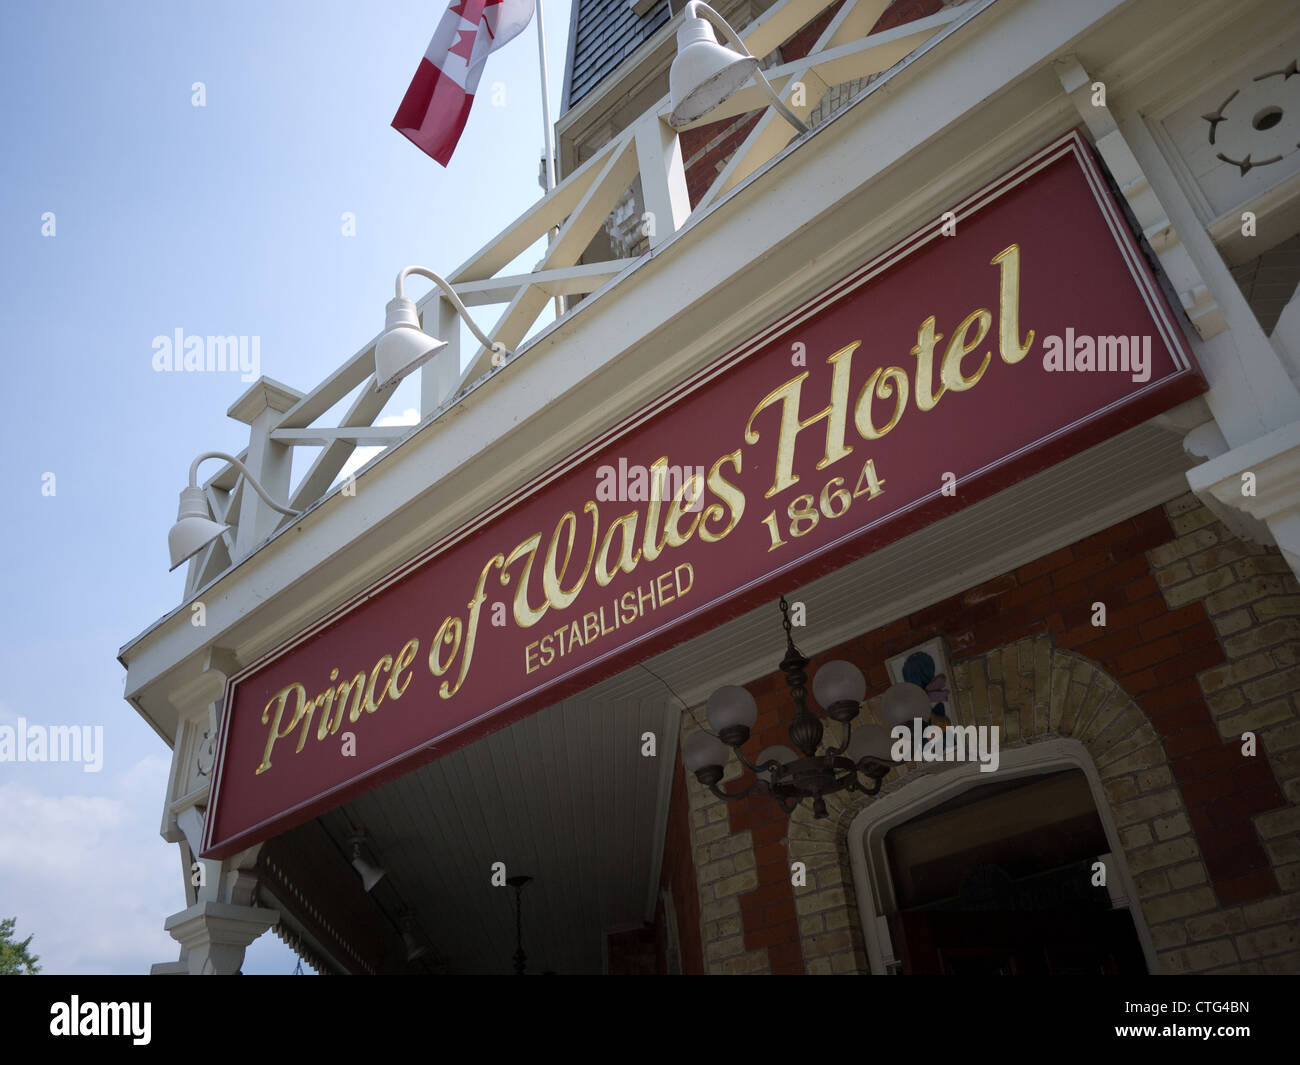 prince of wales hotel sign logo Stock Photo